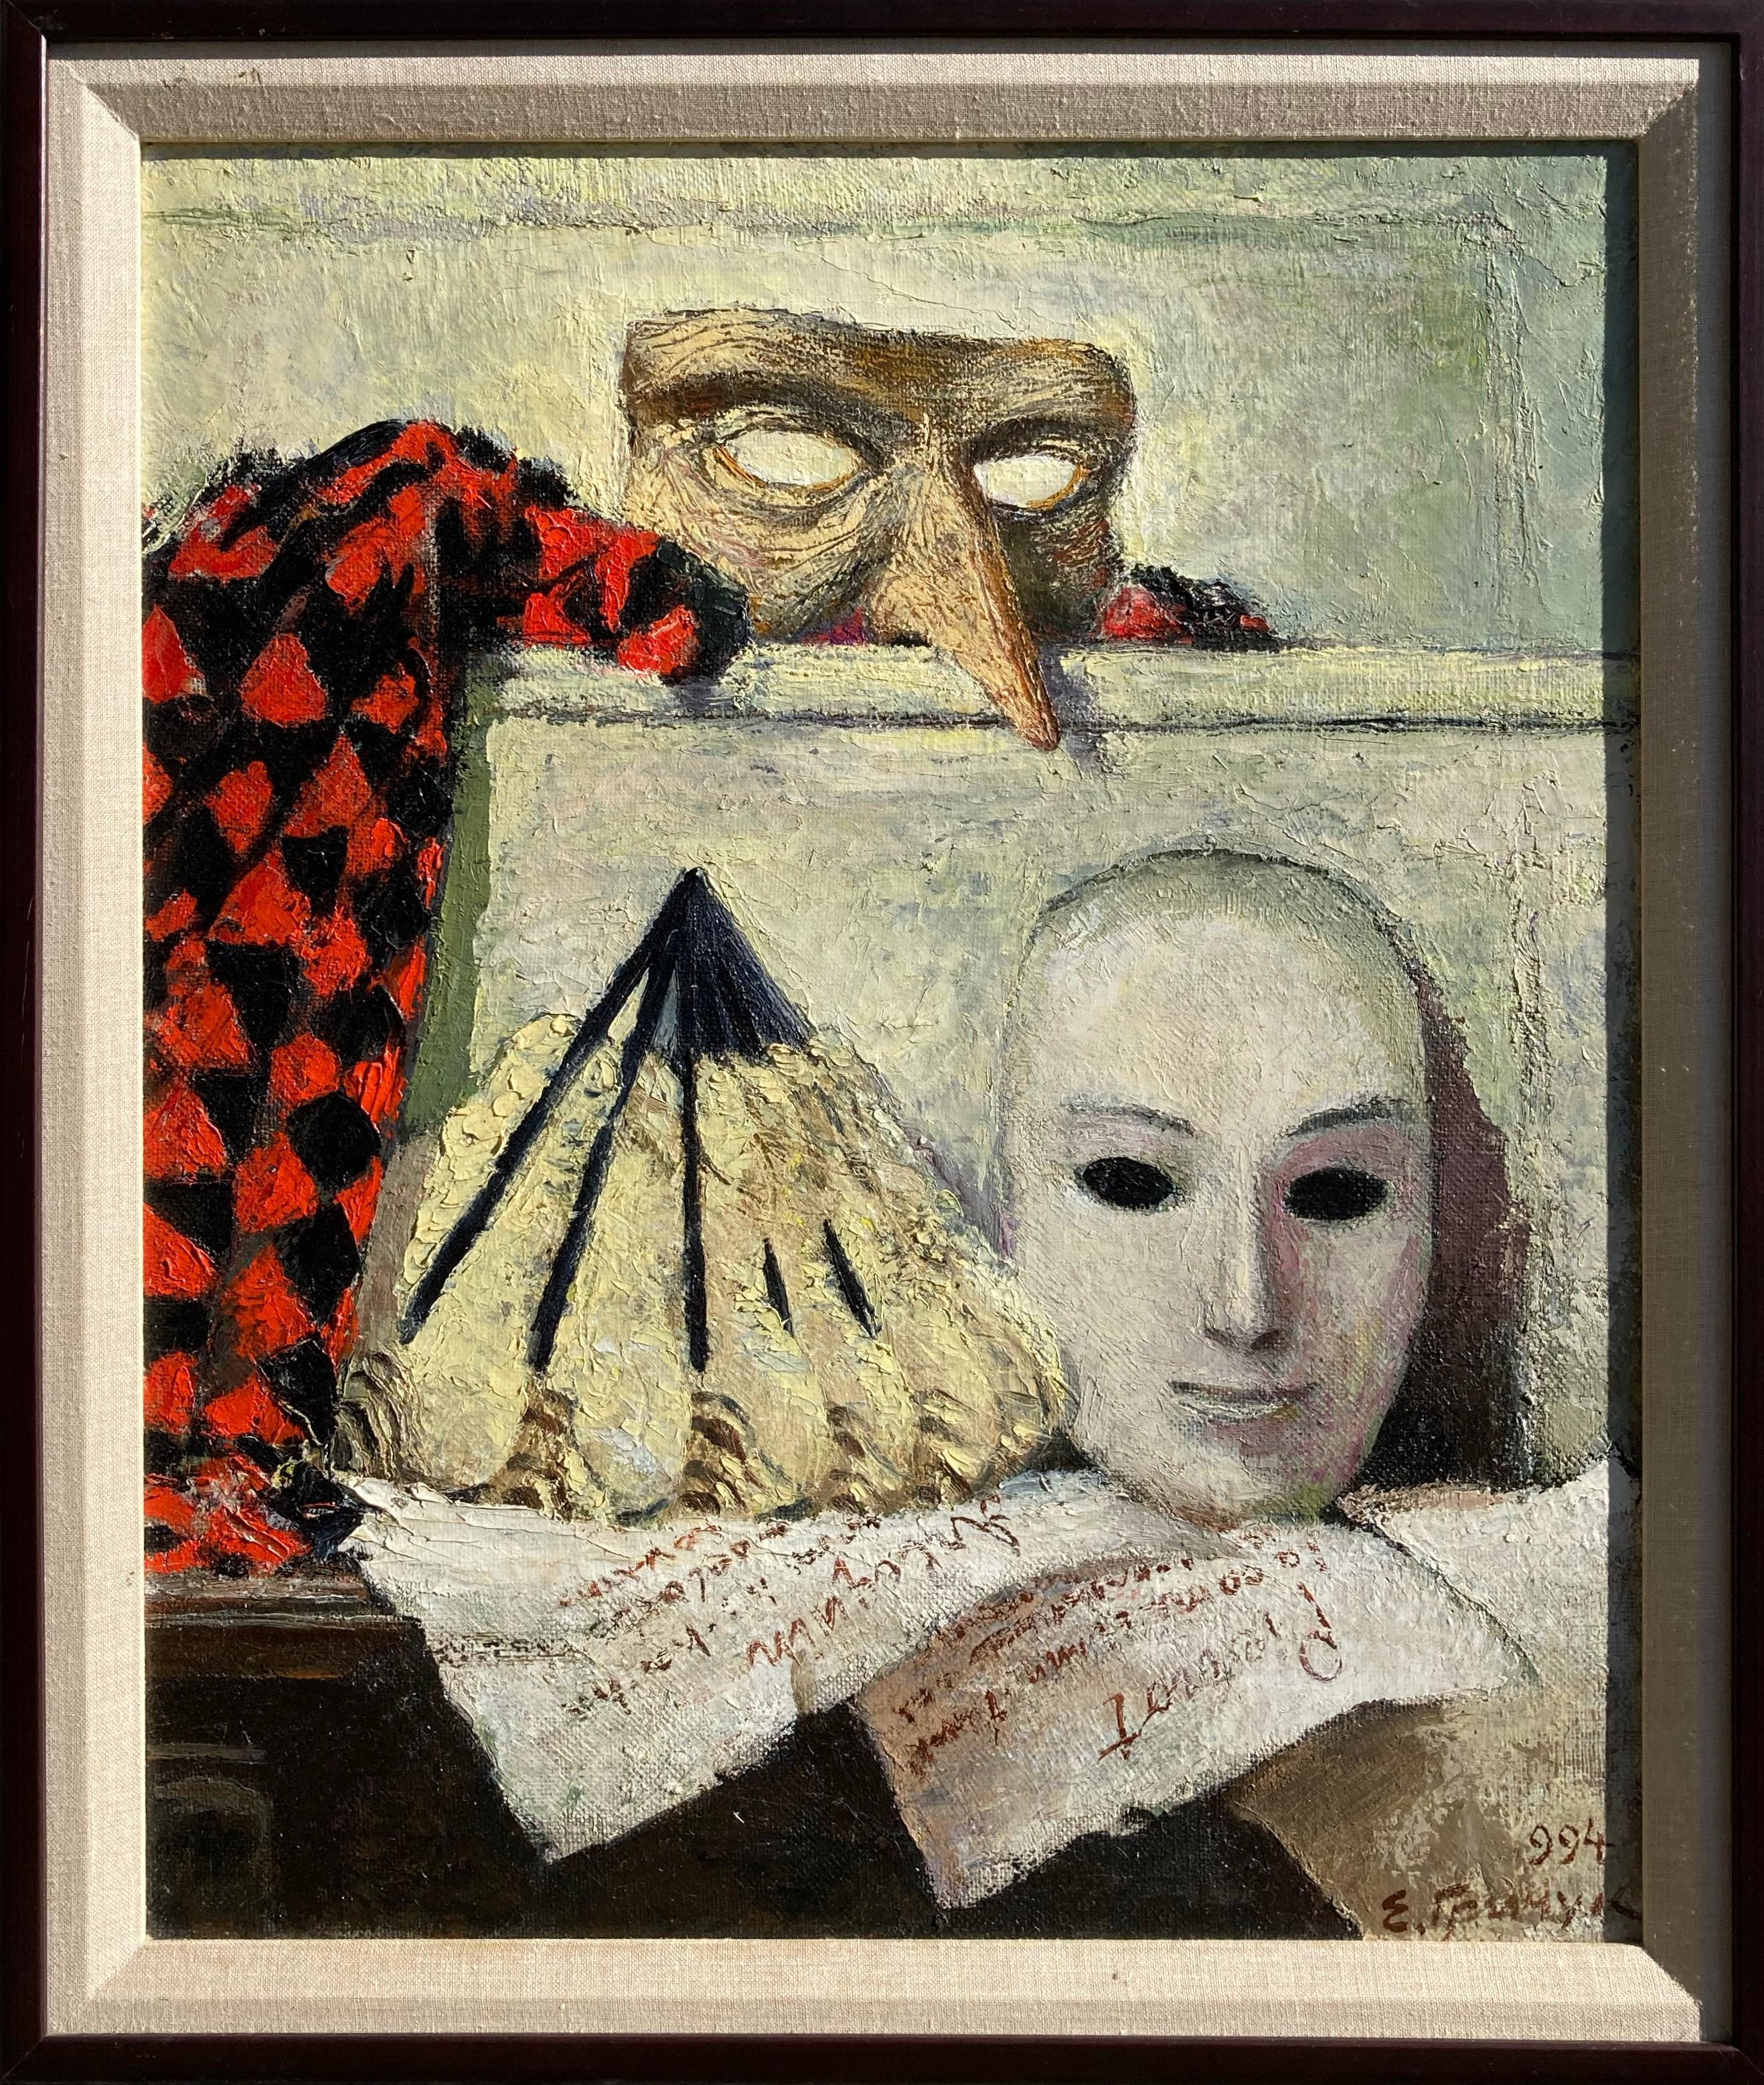 Evgeny Grichuk Figurative Painting - Pierrot and Harlequin (Framed Contemporary Still Life Theatre Painting)